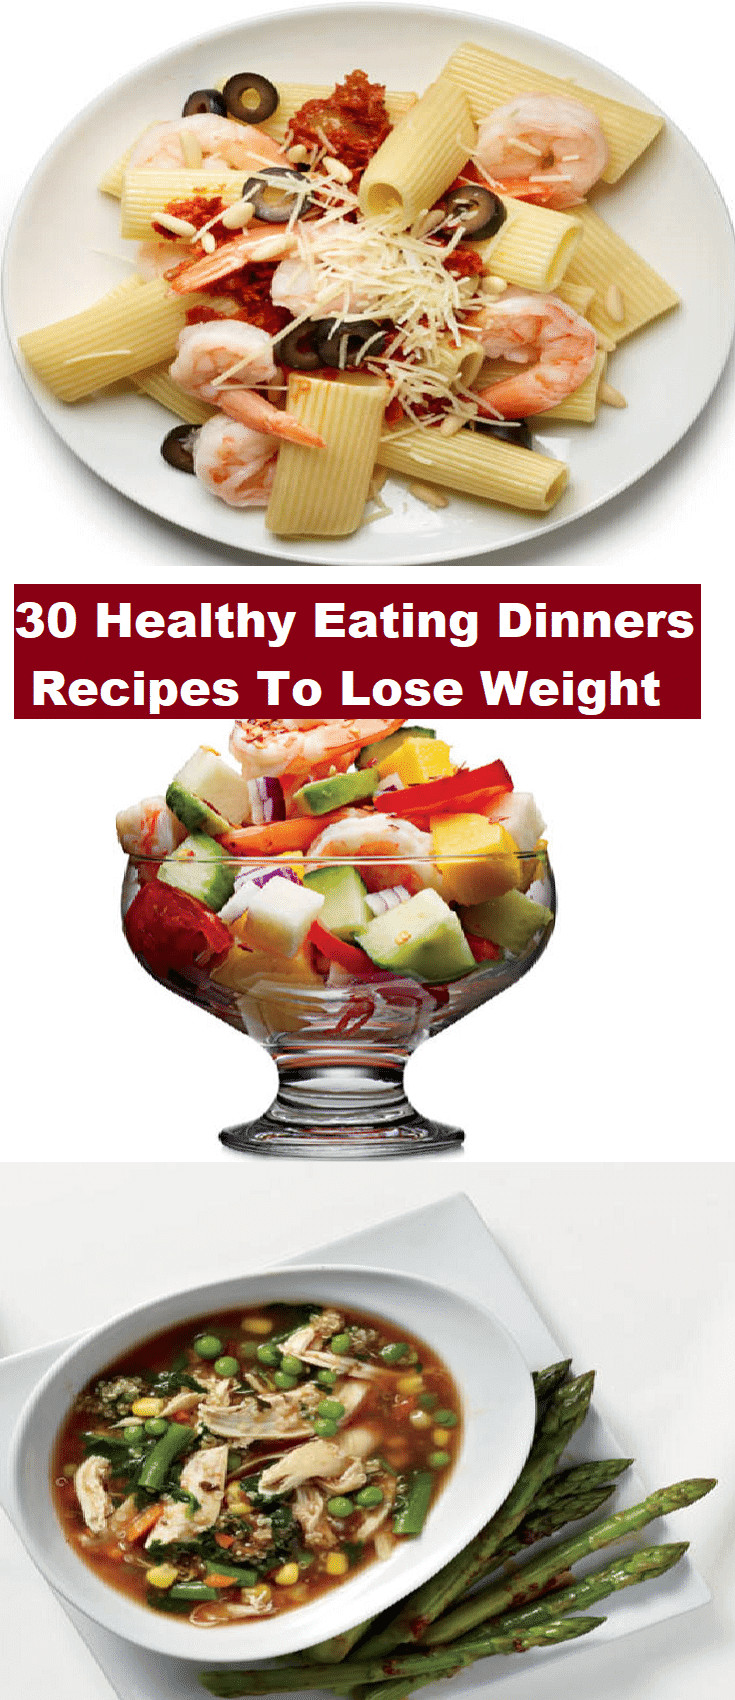 Dinner Ideas For Weight Loss
 30 Healthy Eating Dinners Recipes To Lose Weight Healthy